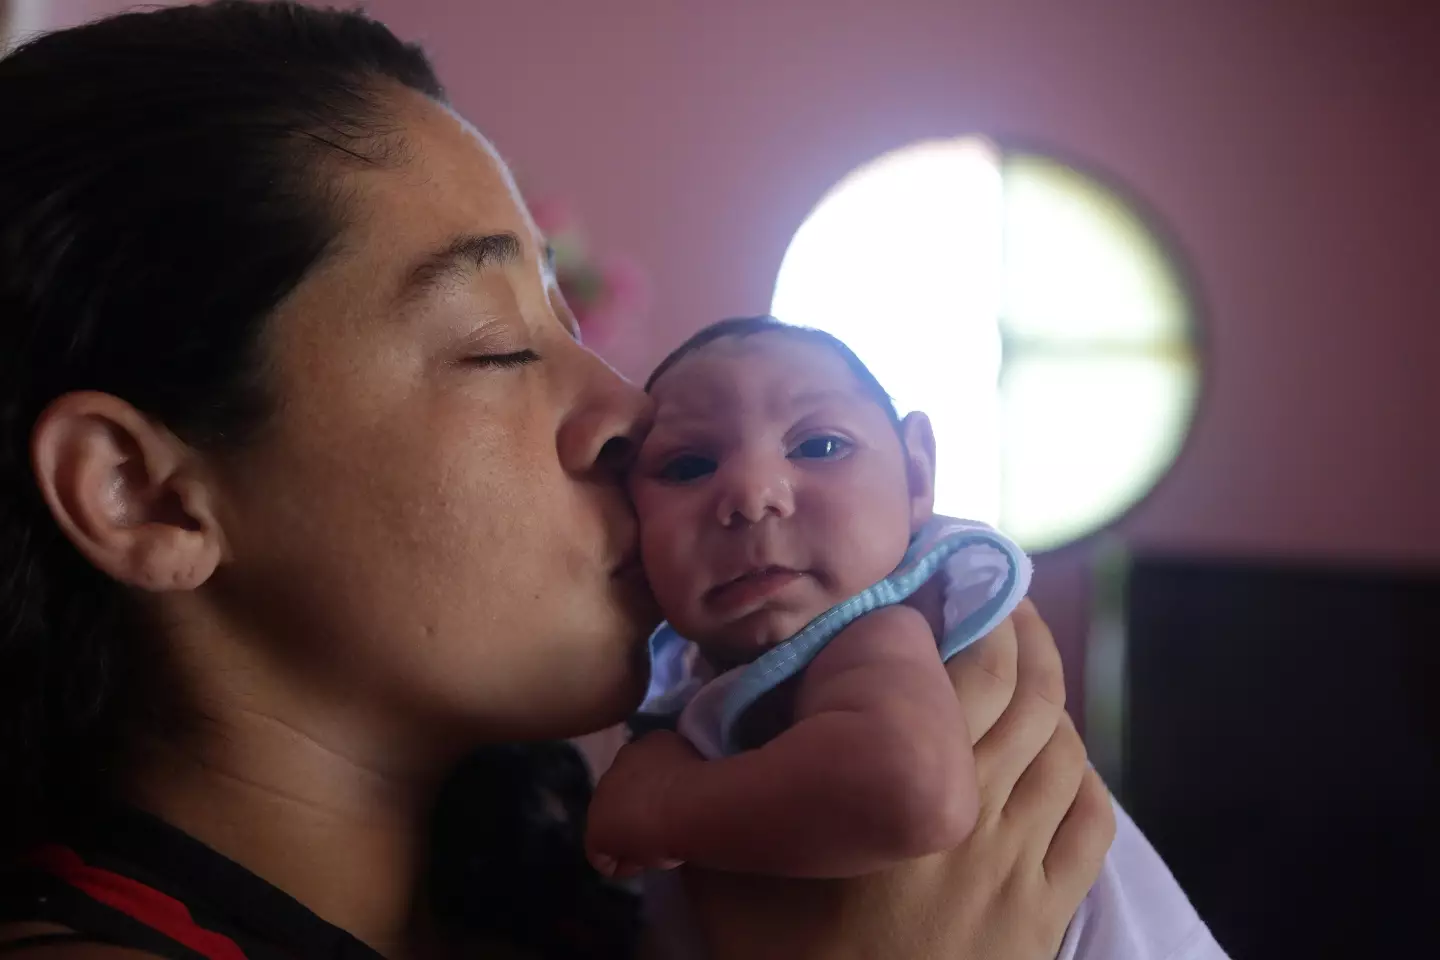 Baby with microcephaly related to the Zika virus. /